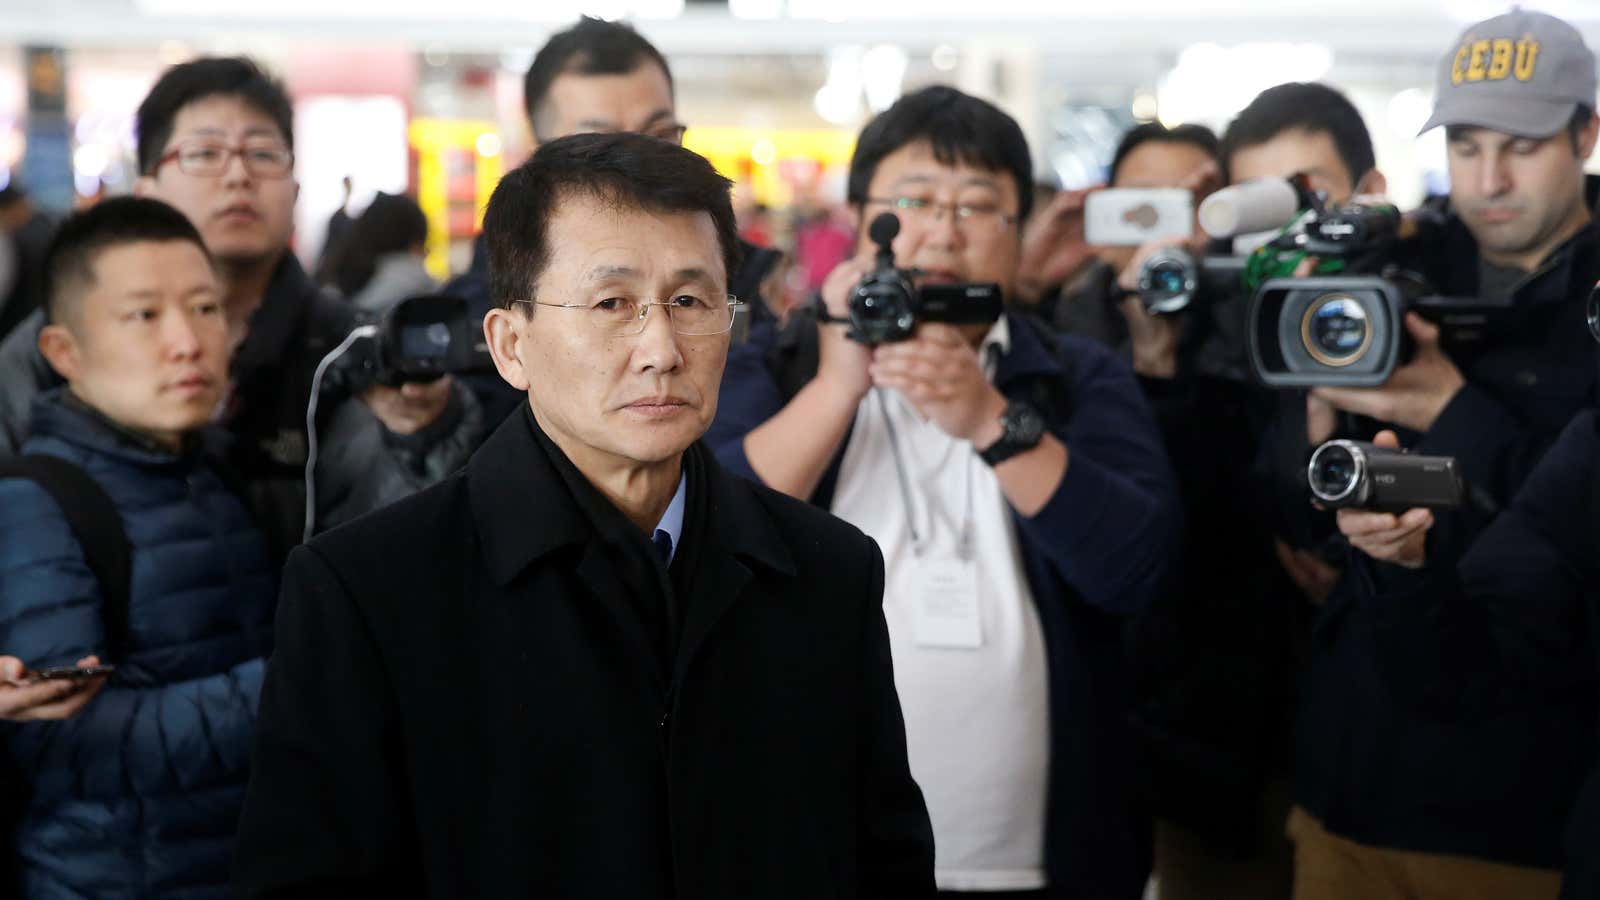 North Korean official Choe Kang-il at the airport in Beijing.